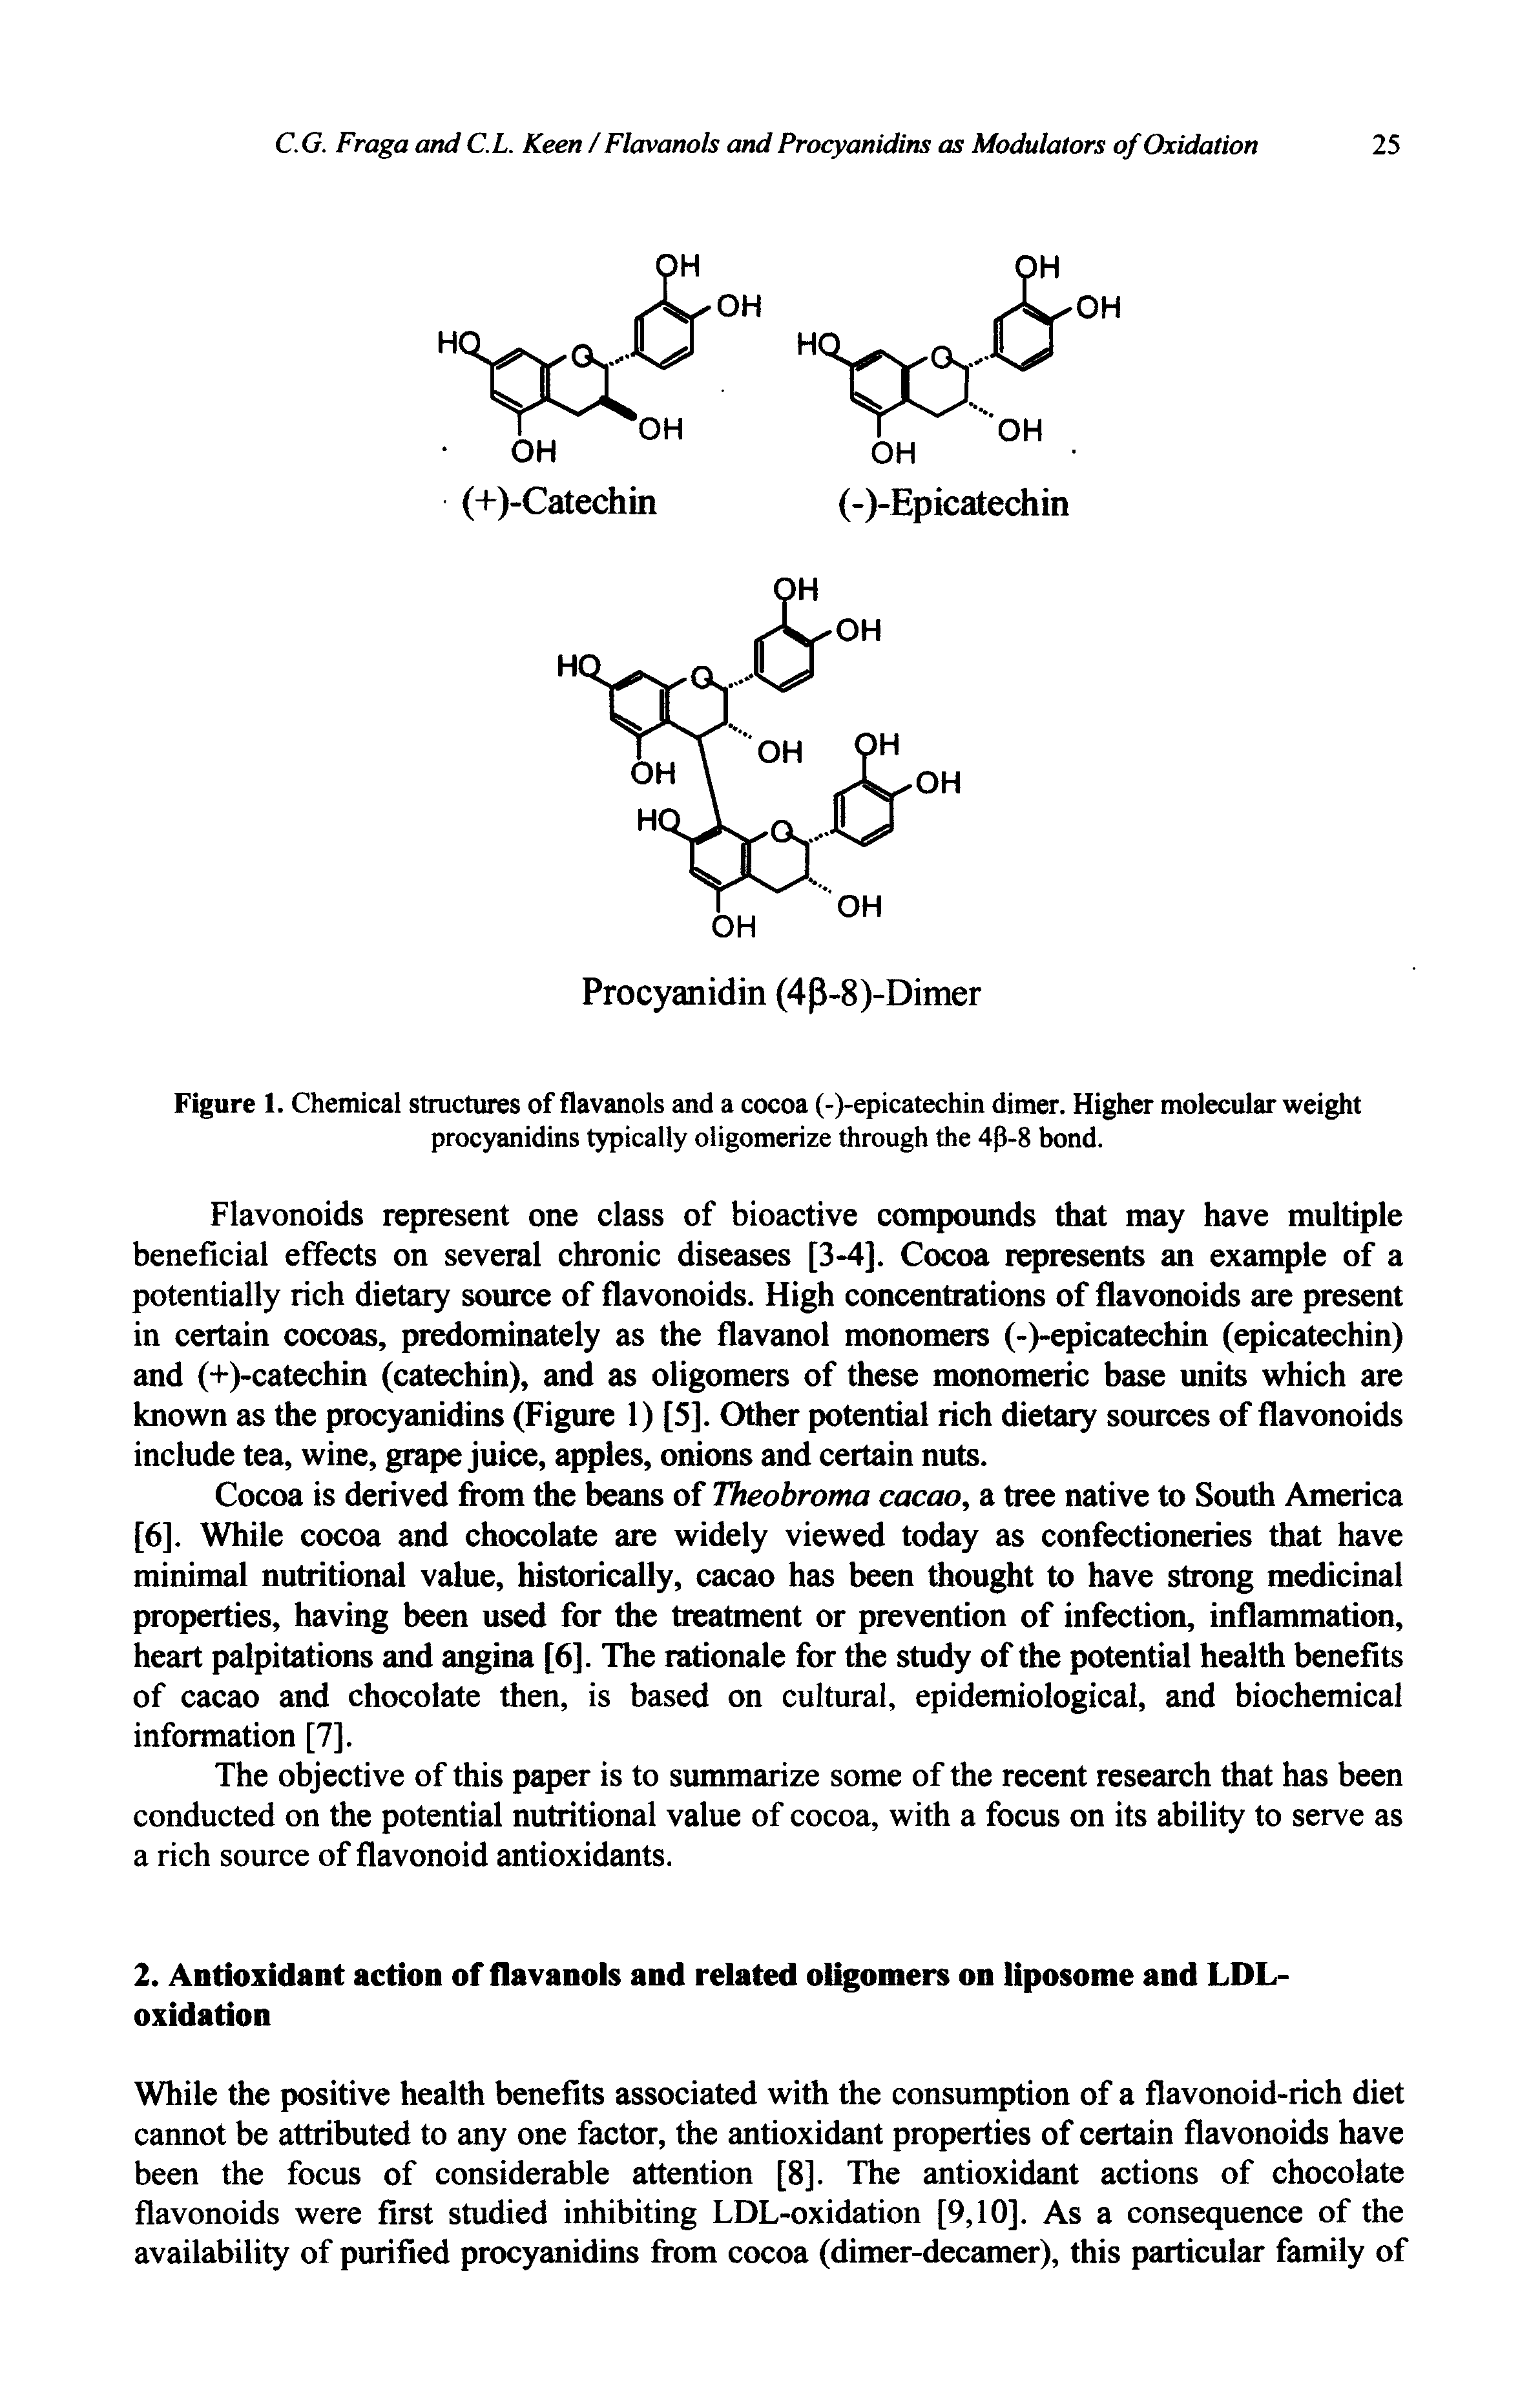 Figure 1. Chemical structures of flavanols and a cocoa (-)-epicatechin dimer. Higher molecular weight procyanidins typically oligomerize through the 4 -8 bond.